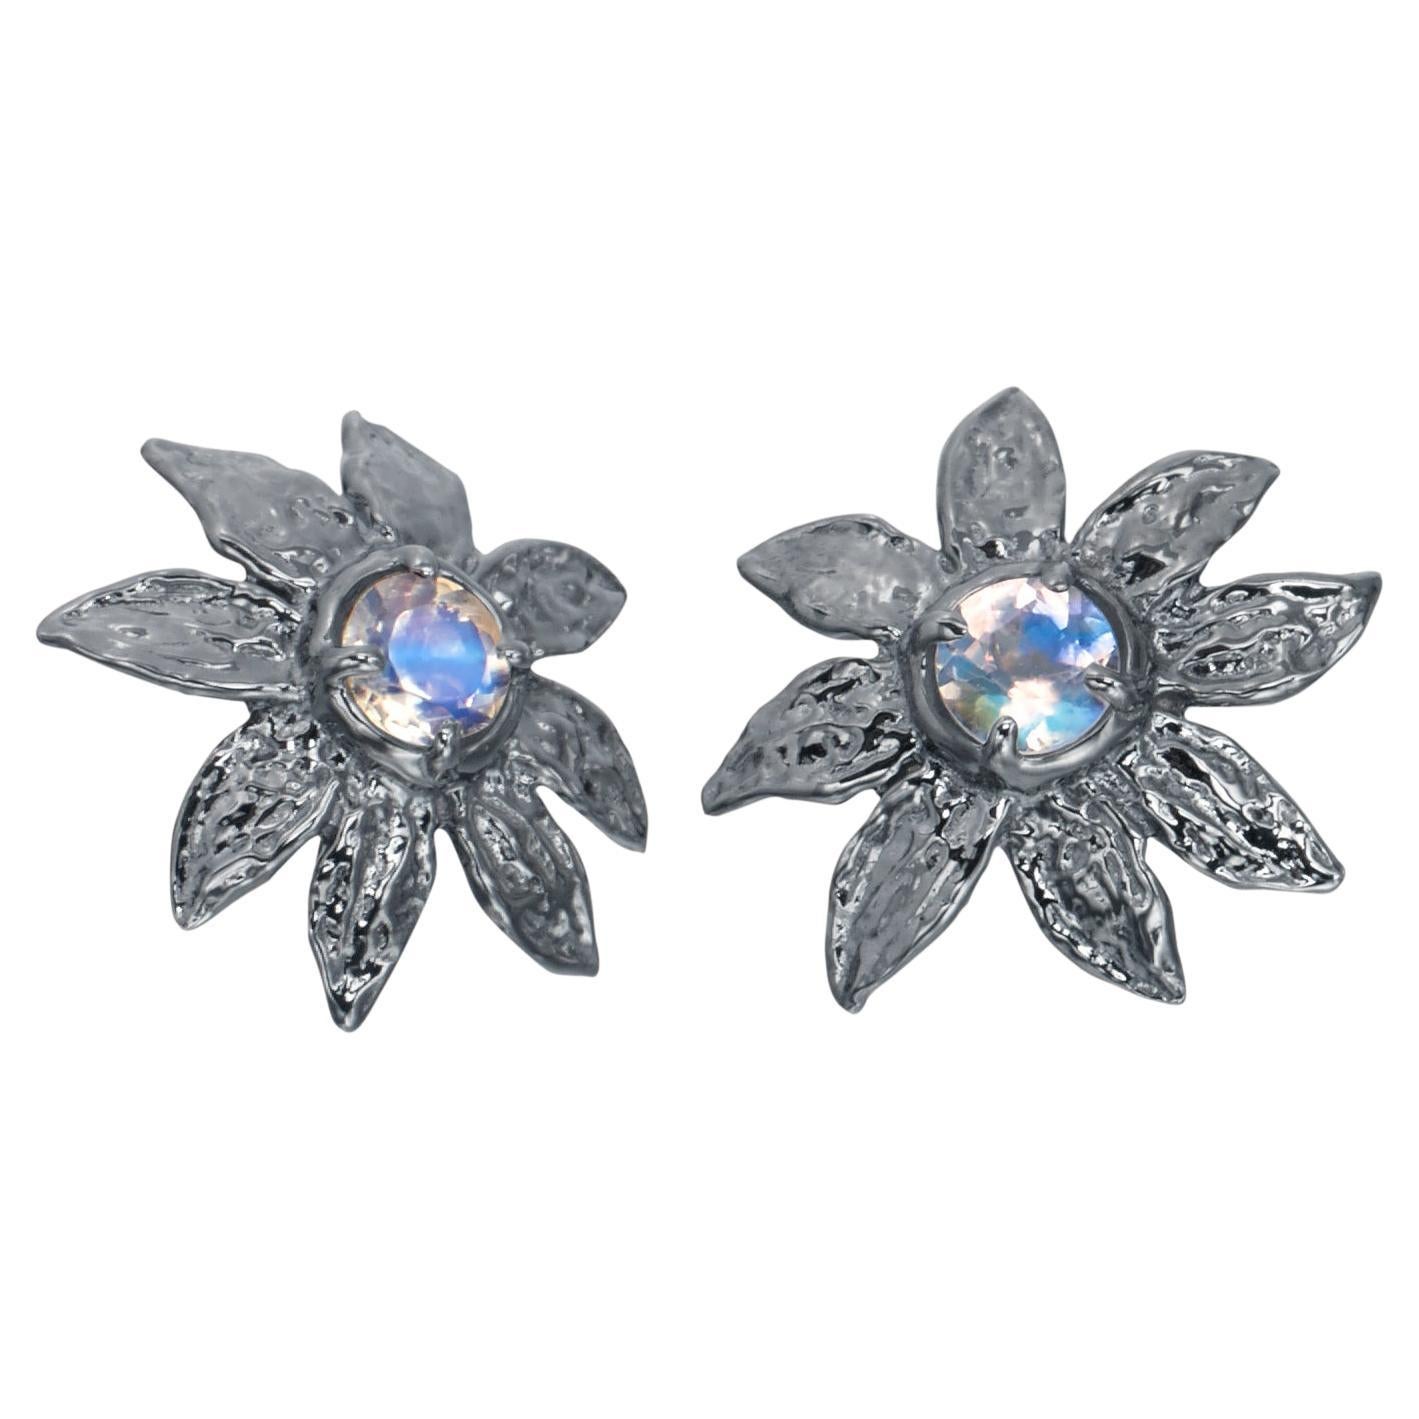 Sterling Silver Flower Stud Earrings with Moonstones with 14 Karat Gold Post For Sale